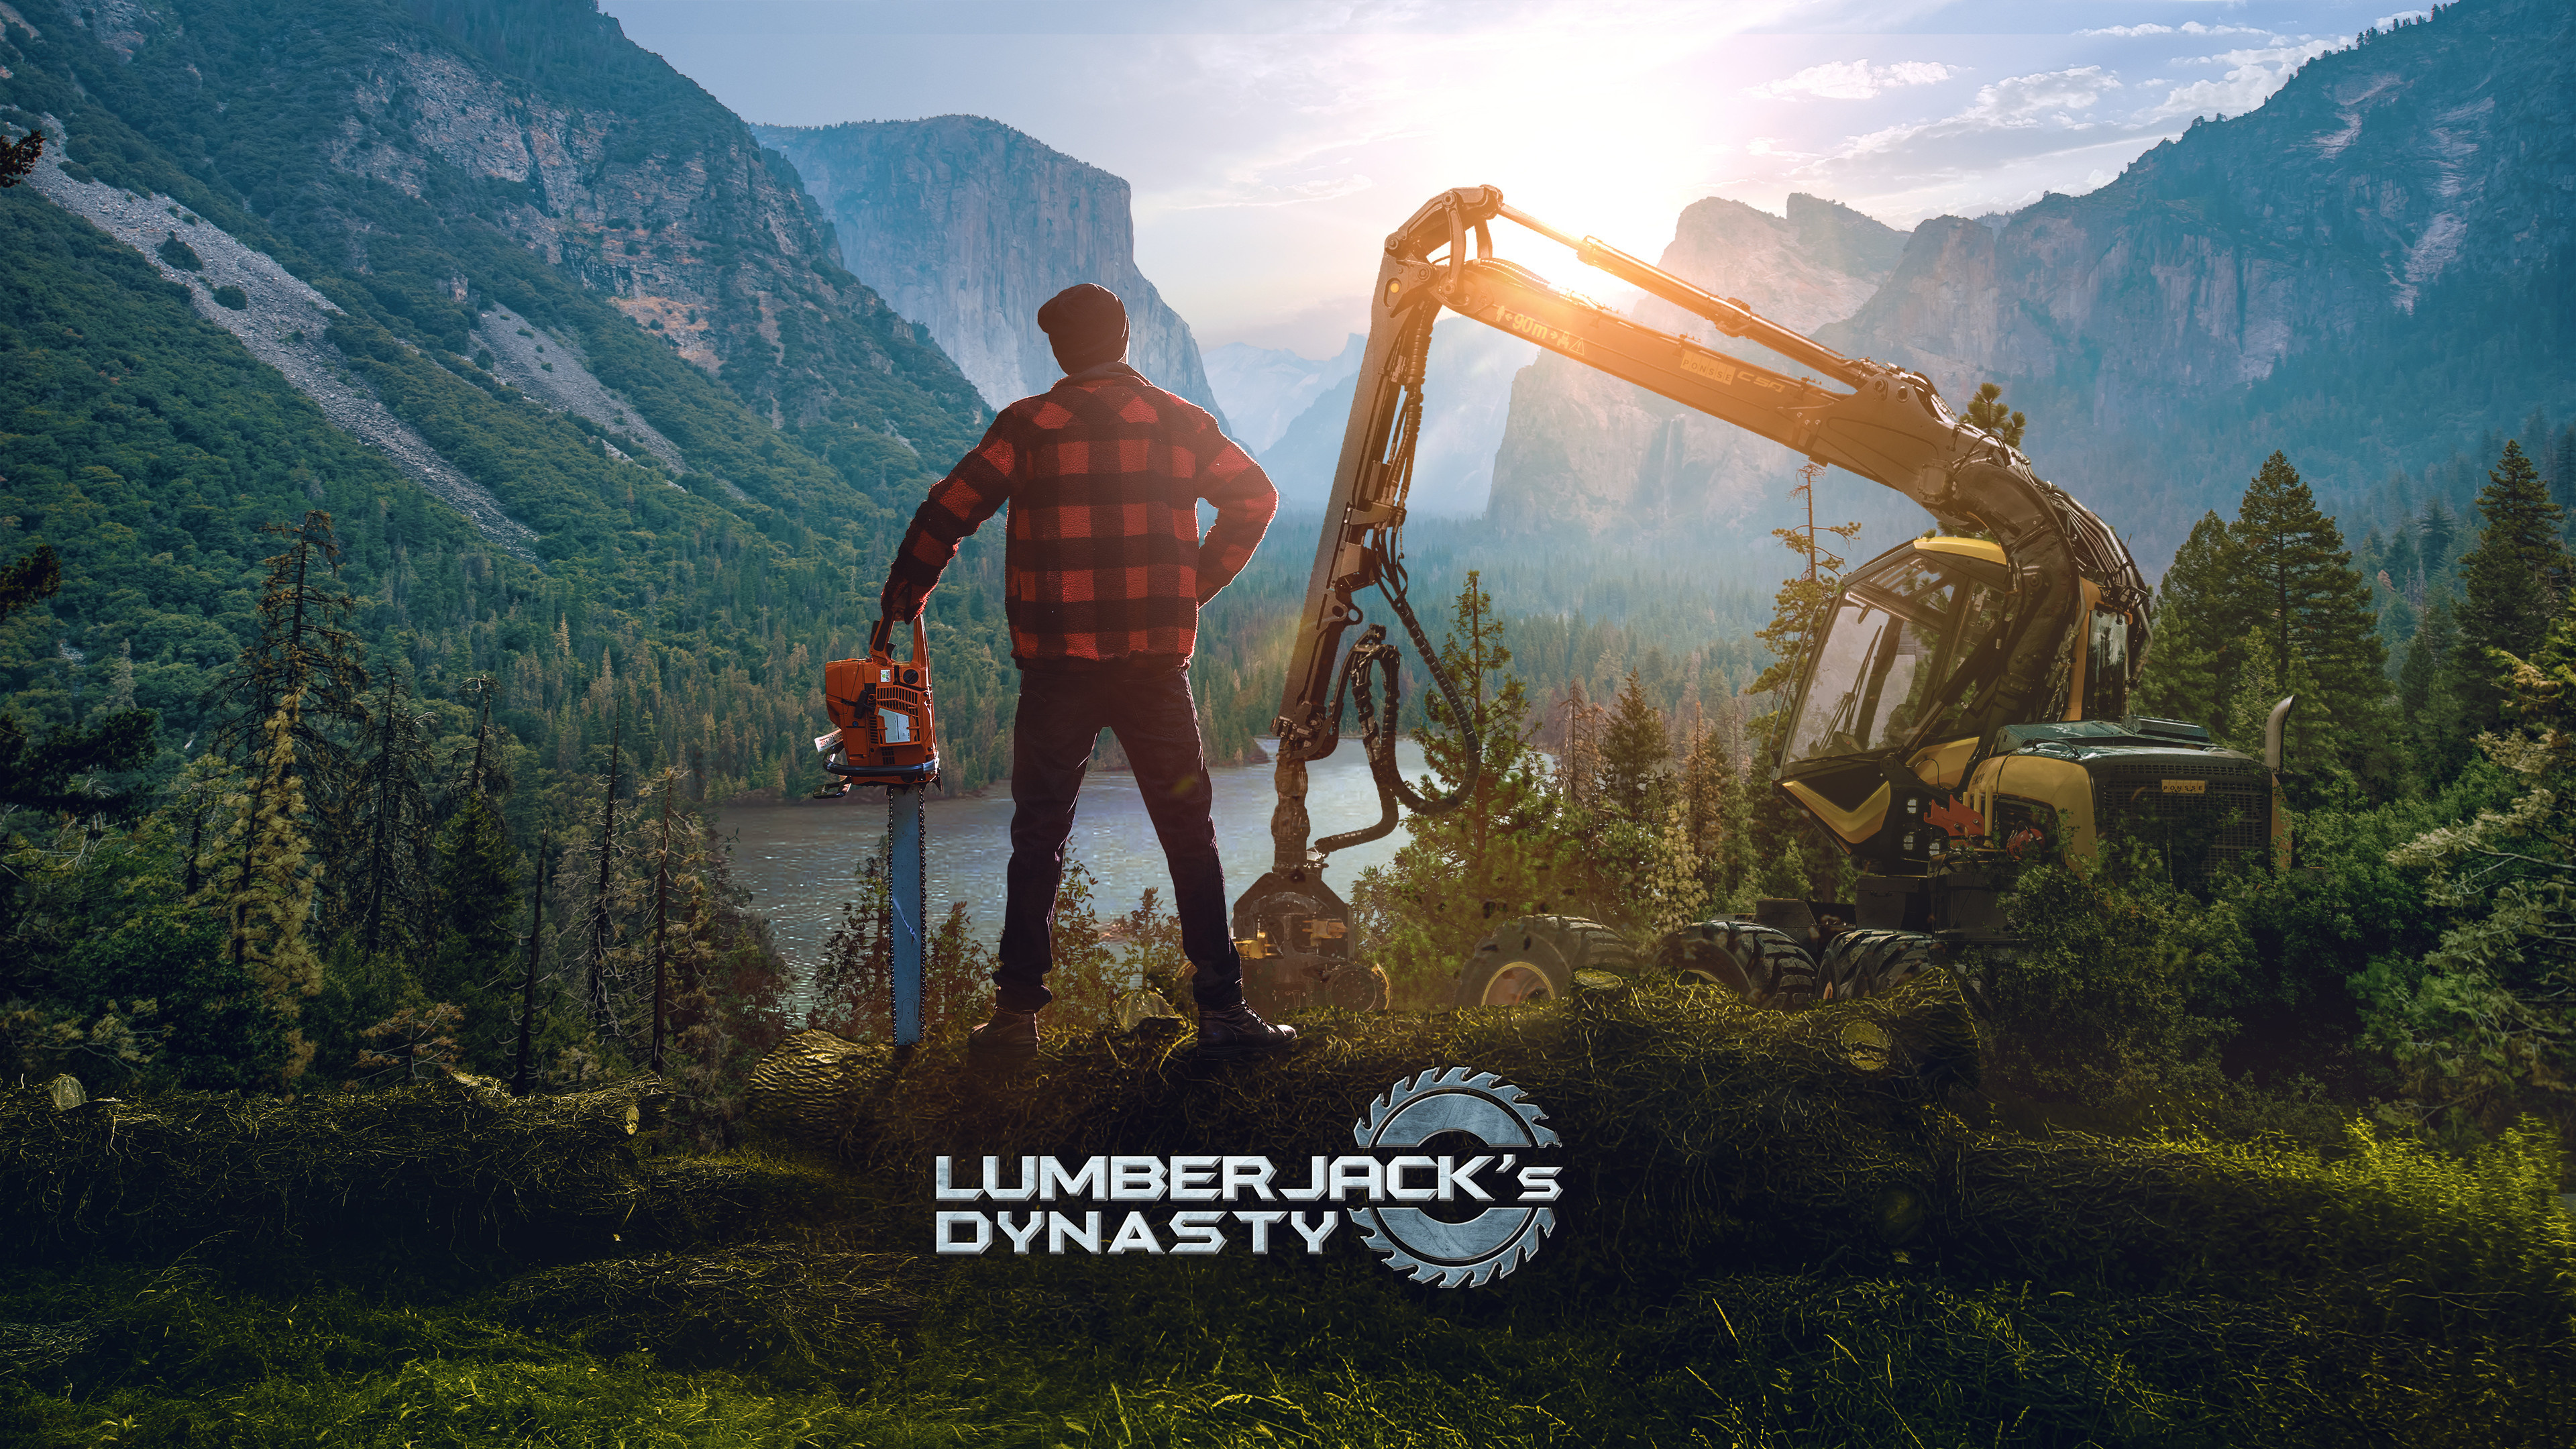 Lumberjack: Lumberjack's Dynasty Cover, Video game, A person whose job is to cut down trees. 3840x2160 4K Wallpaper.